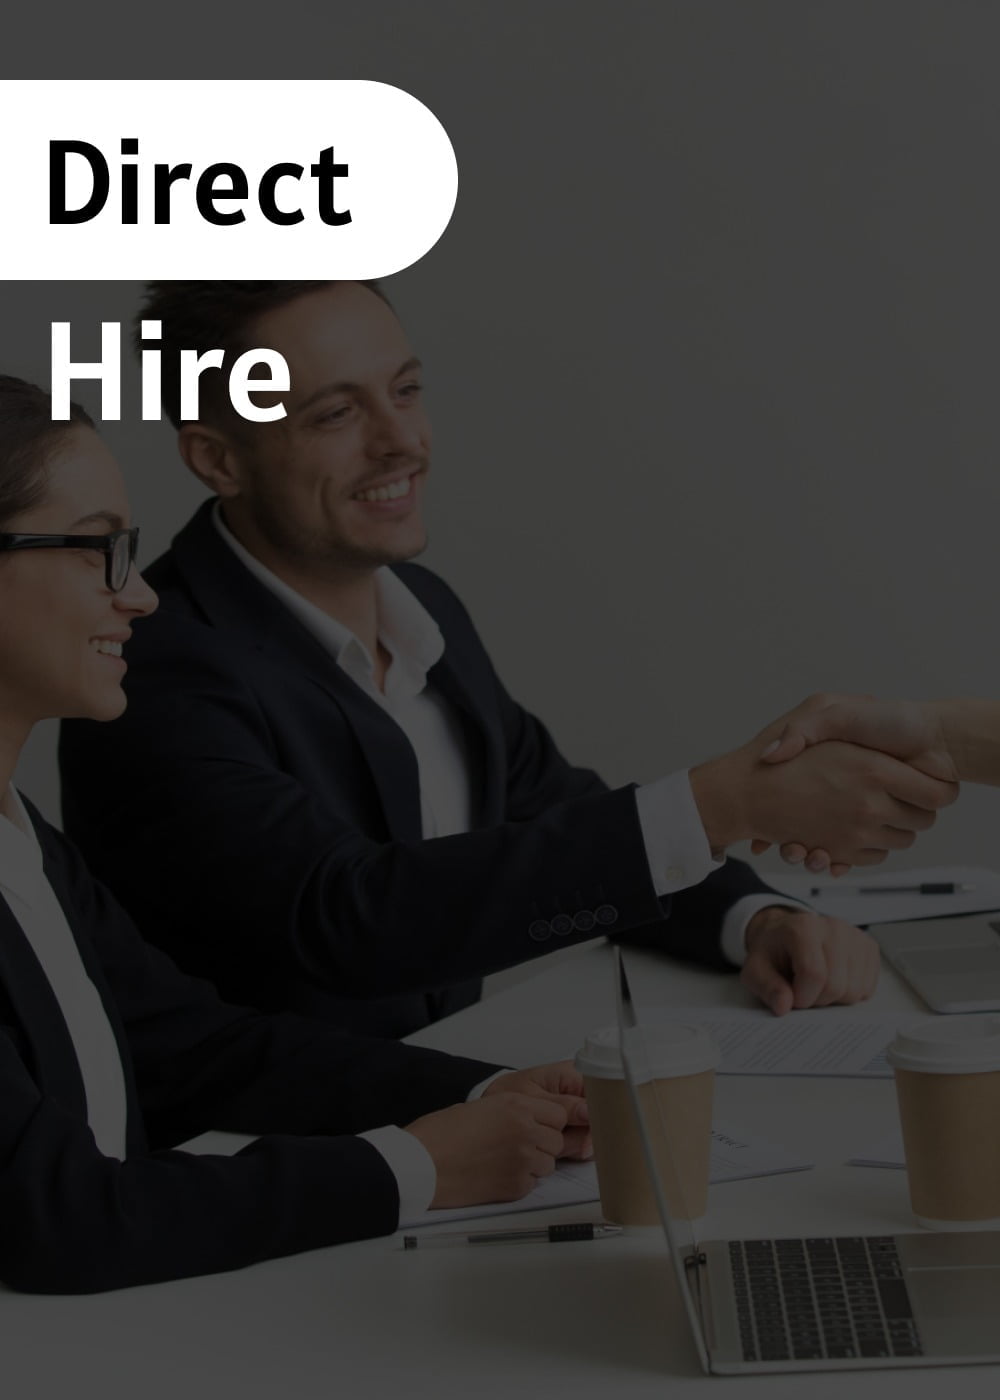 We specialize in recruiting top talent for direct hire placements in various industries, including IT, finance, healthcare, and more. Our experienced recruiters will work closely with you to understand your specific needs and find the perfect candidate match for your business. 